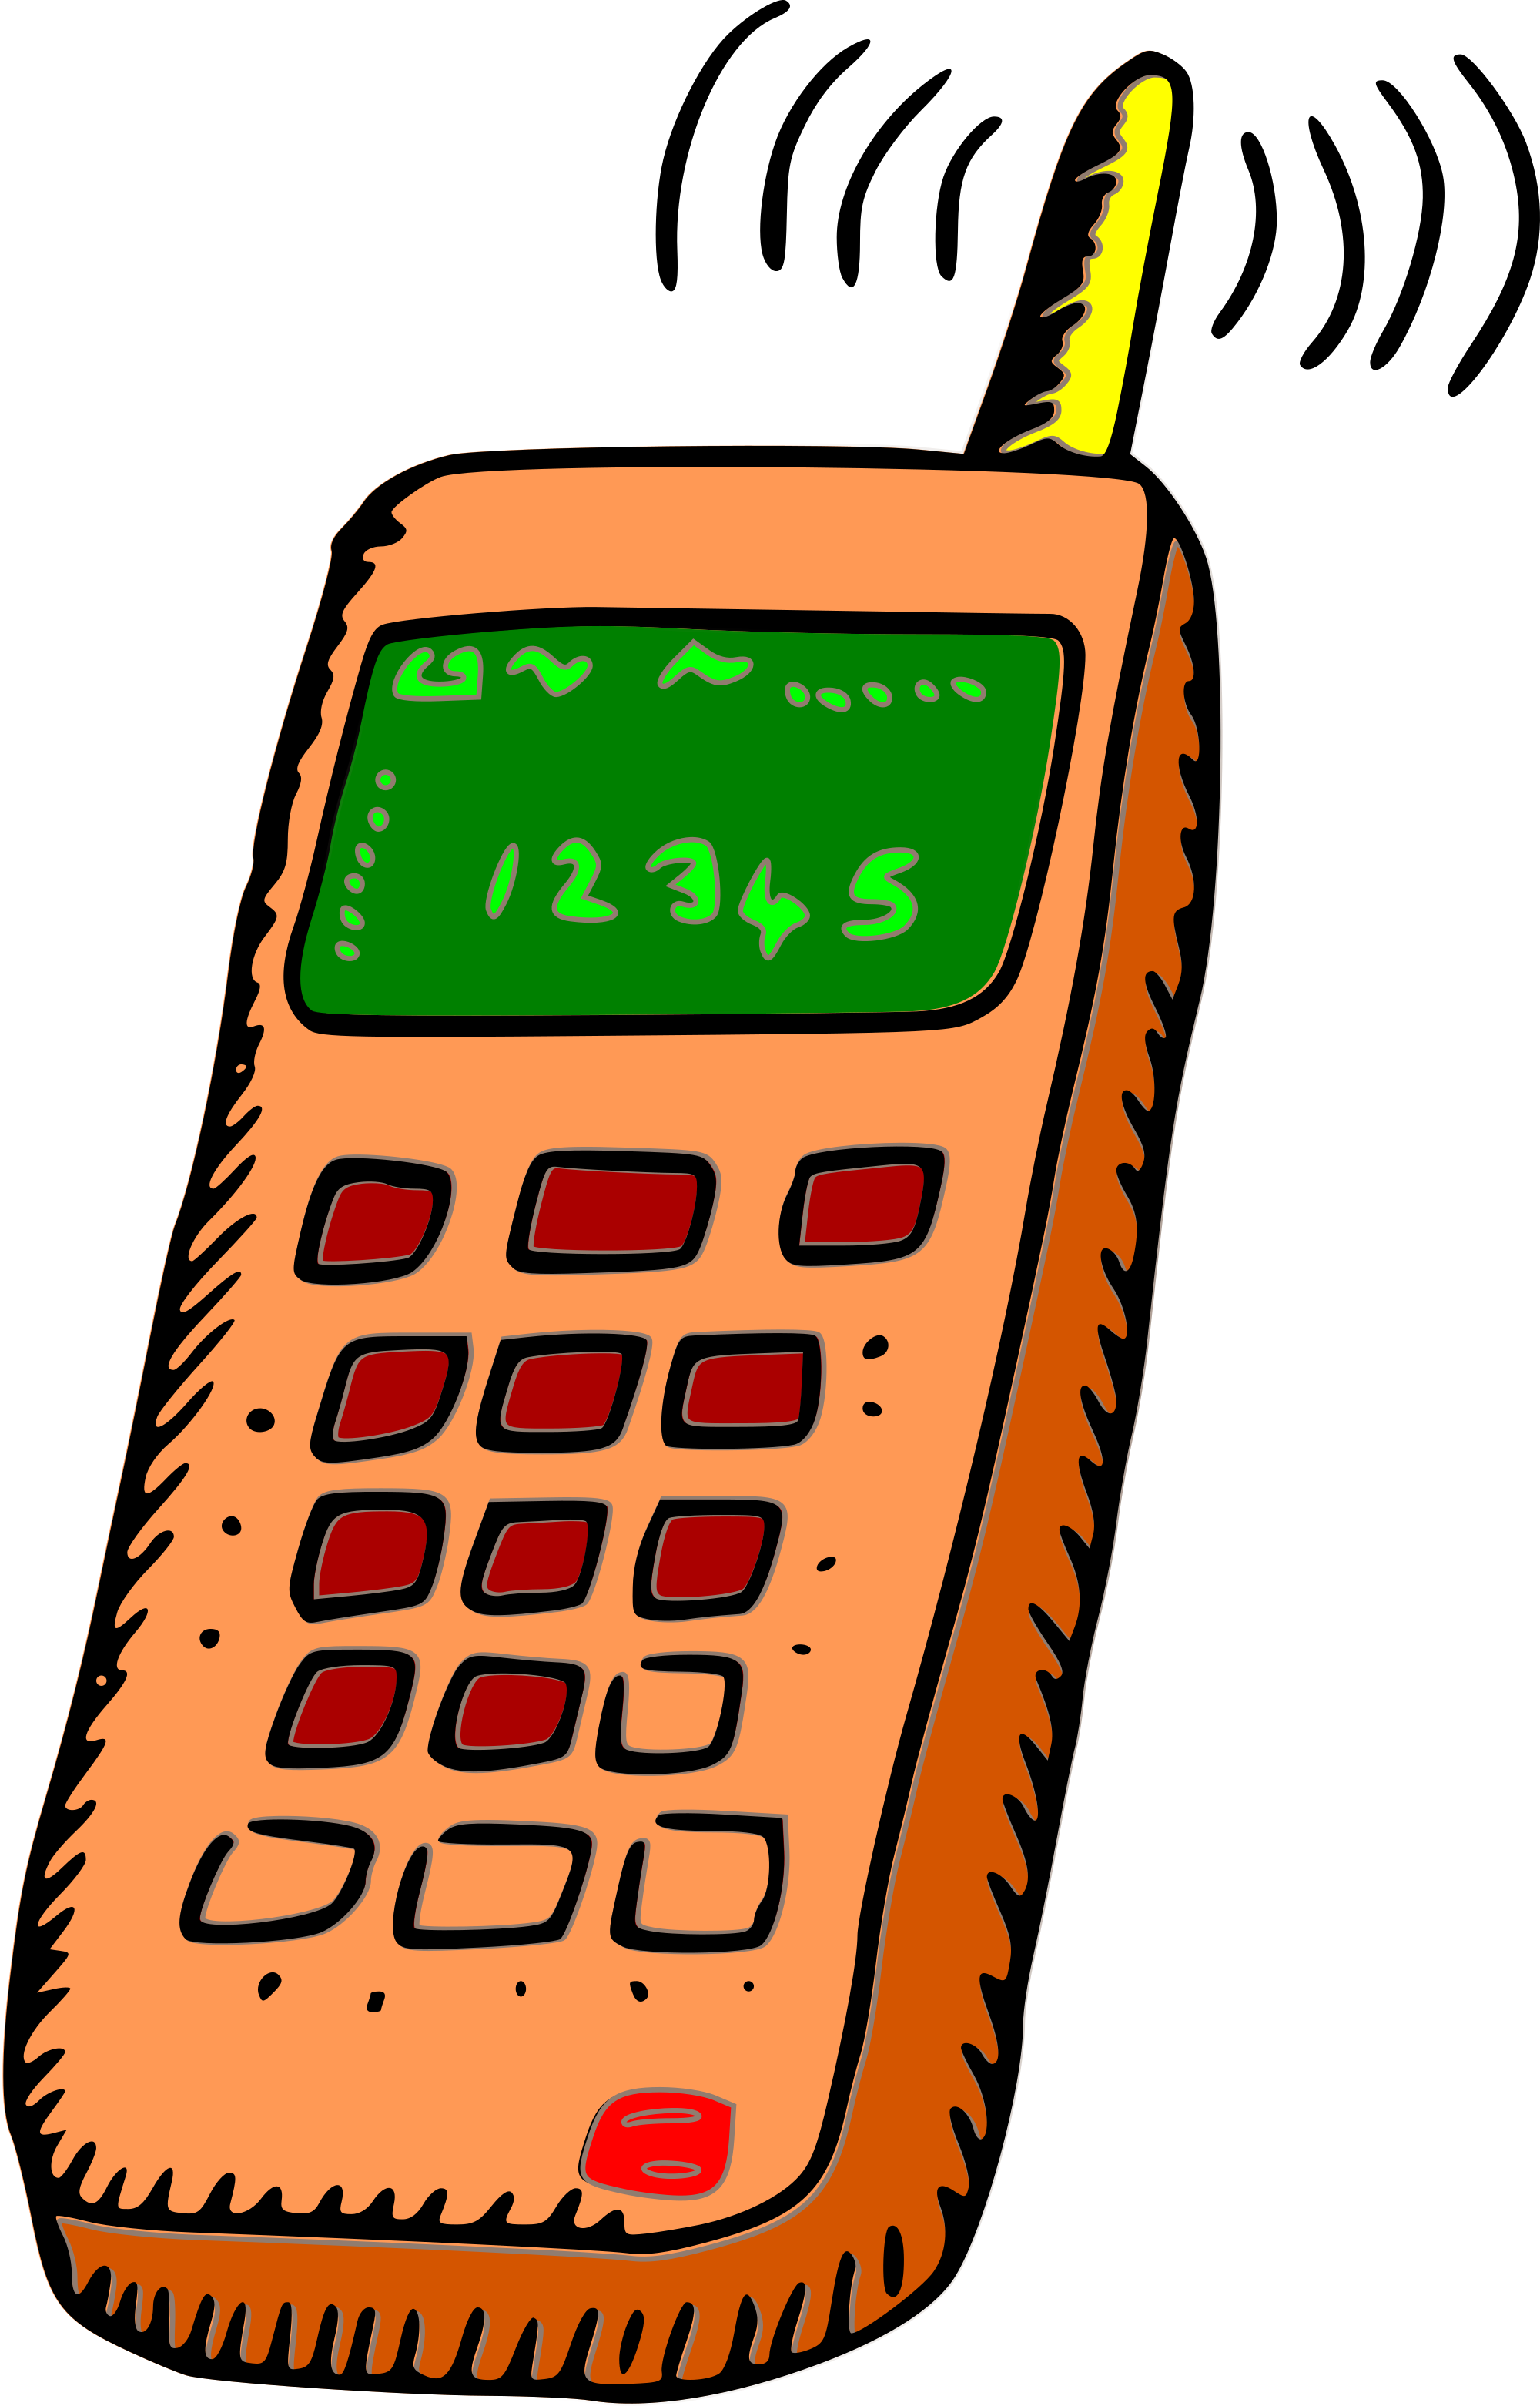 Nice clipart for mobile phones - ClipartFox